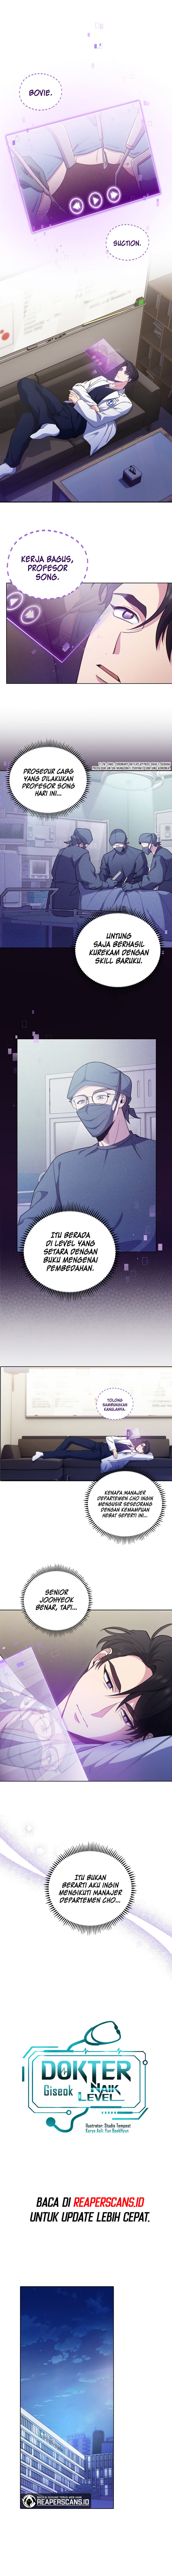 level-up-doctor Chapter 37